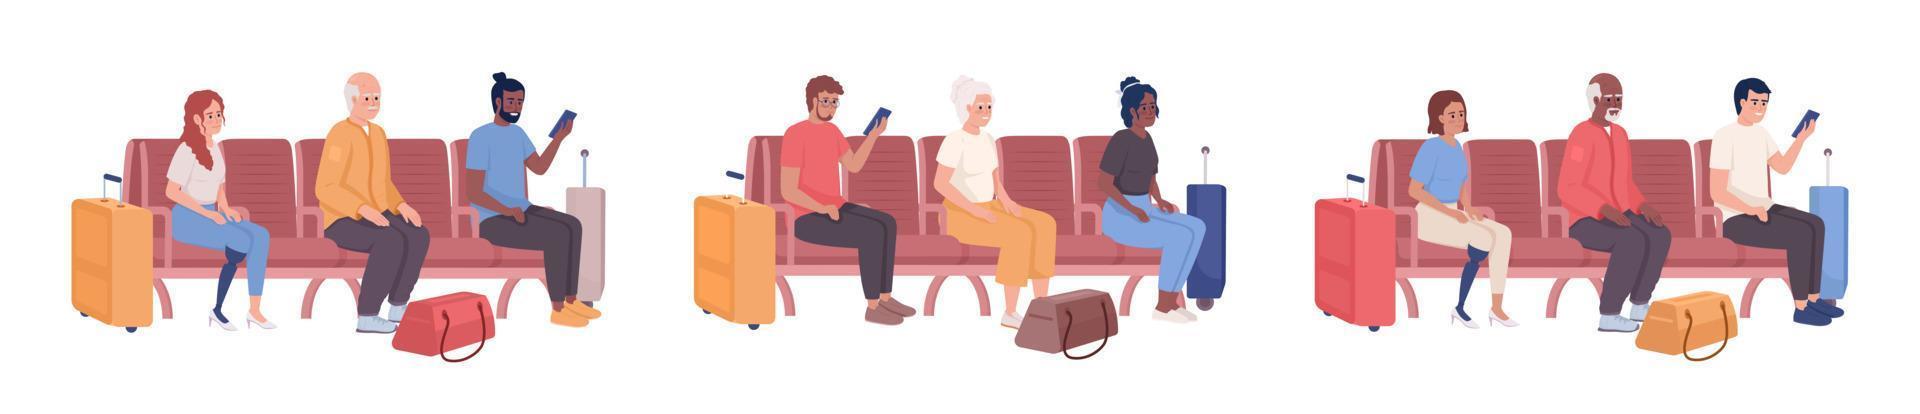 Passengers sitting in airport chairs semi flat color vector characters set. Editable figures. Full body people on white. Simple cartoon style illustration pack for web graphic design and animation